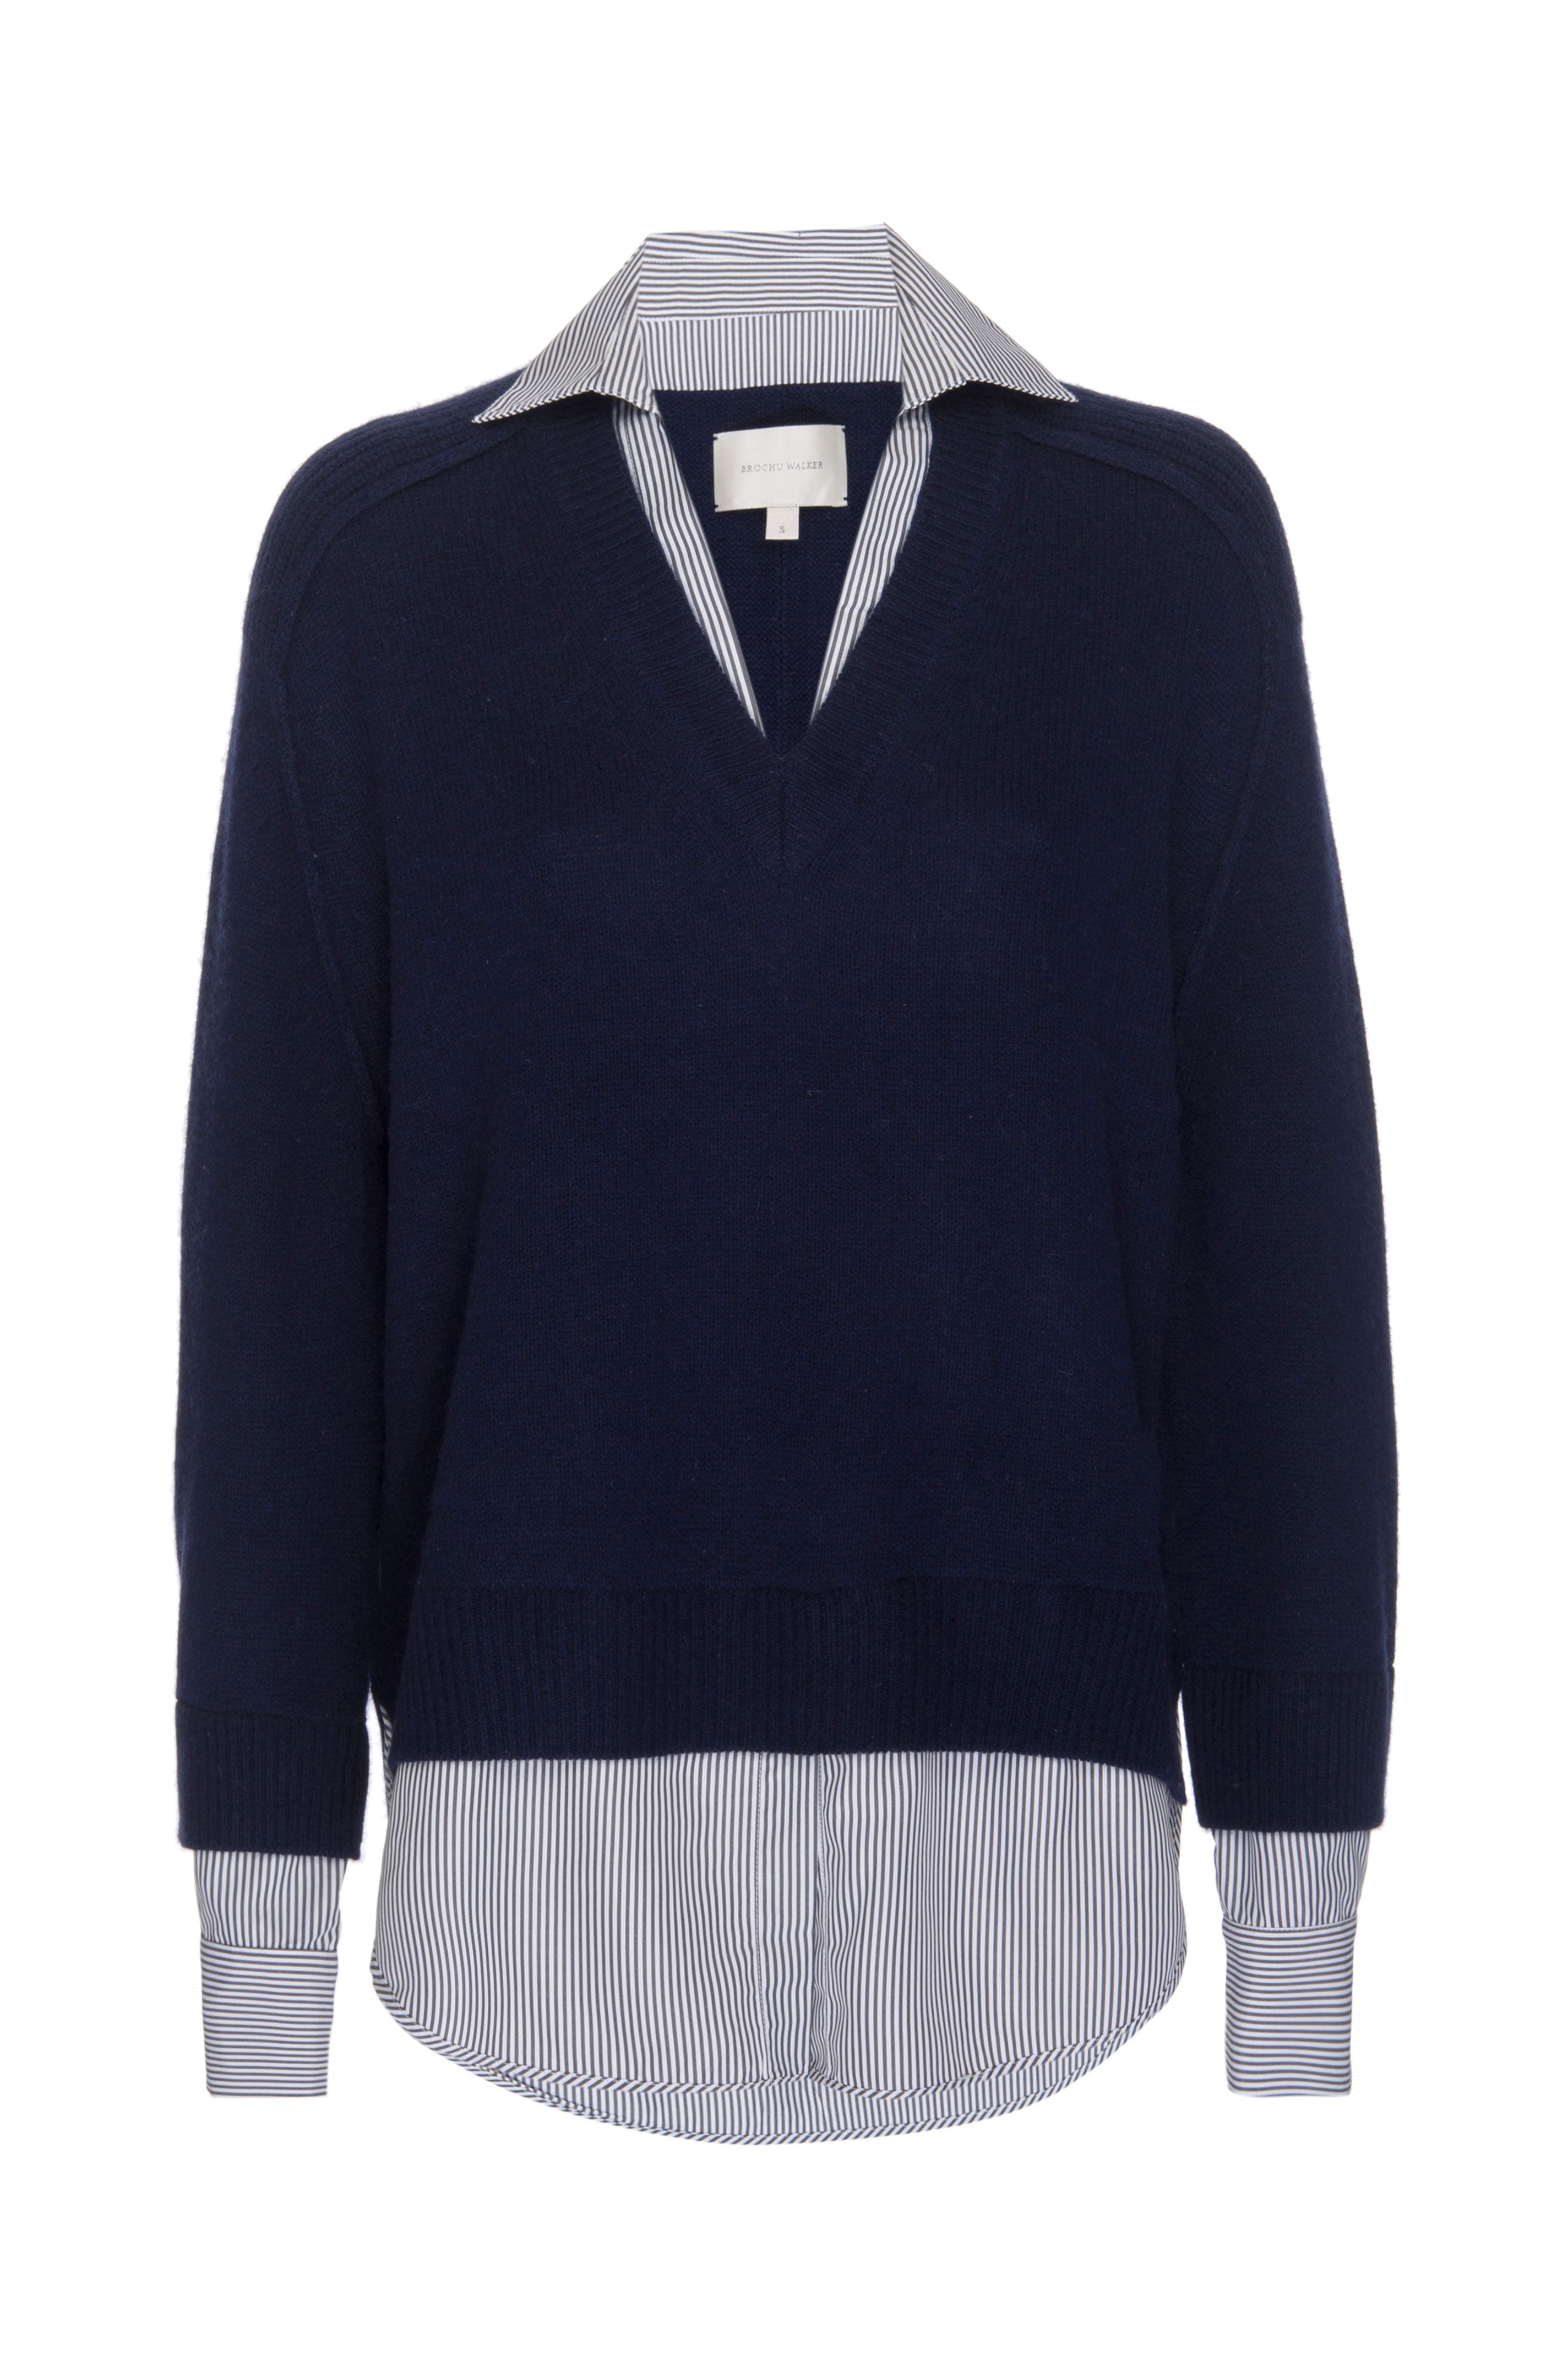 Looker navy stripe layered v-neck sweater flat view